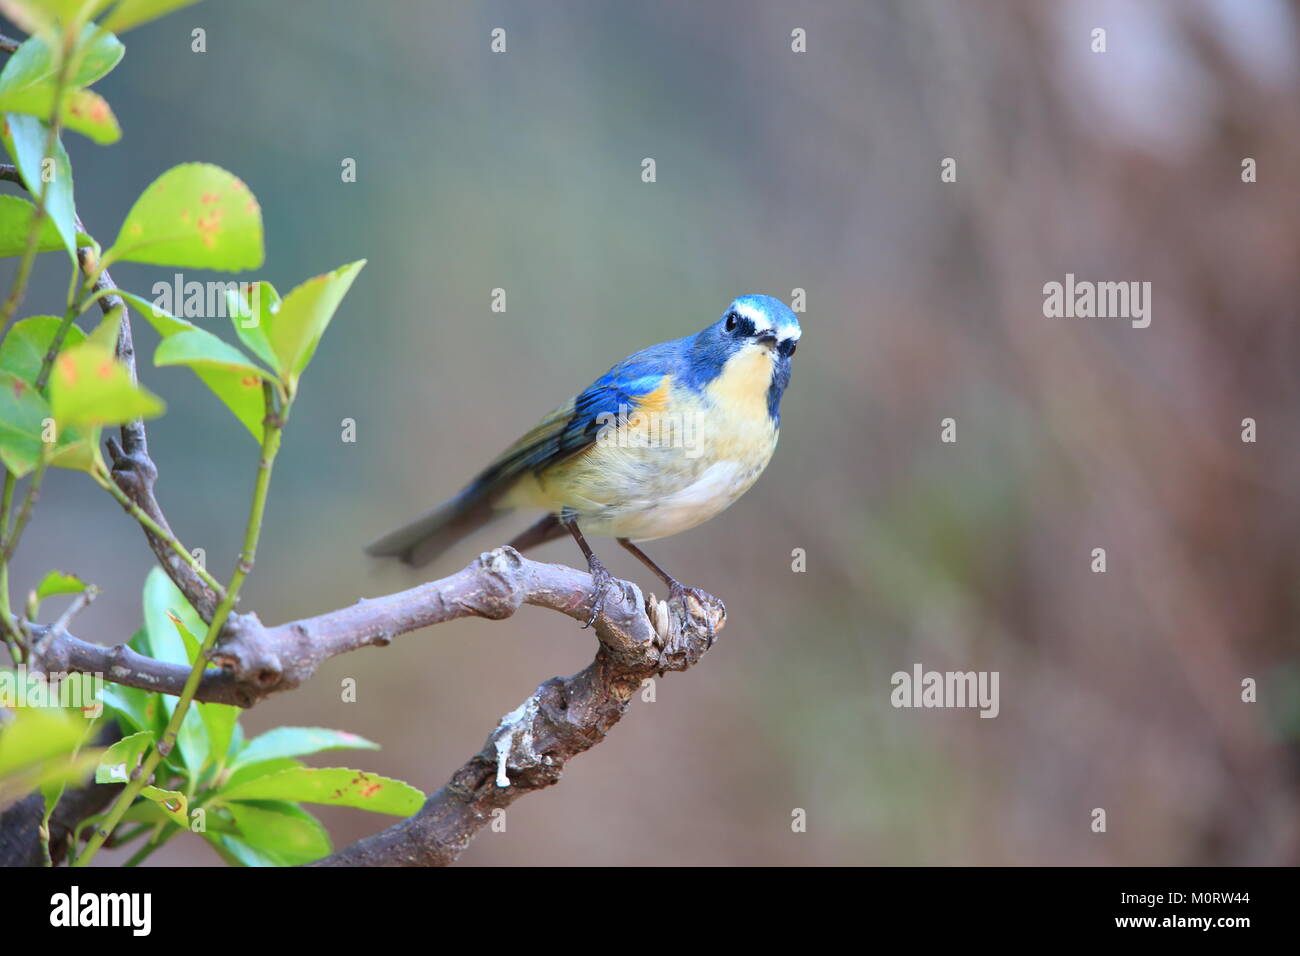 Red-flanked bluetail or Orange-flanked bush robin(Tarsiger cyanurus) in Japan Stock Photo